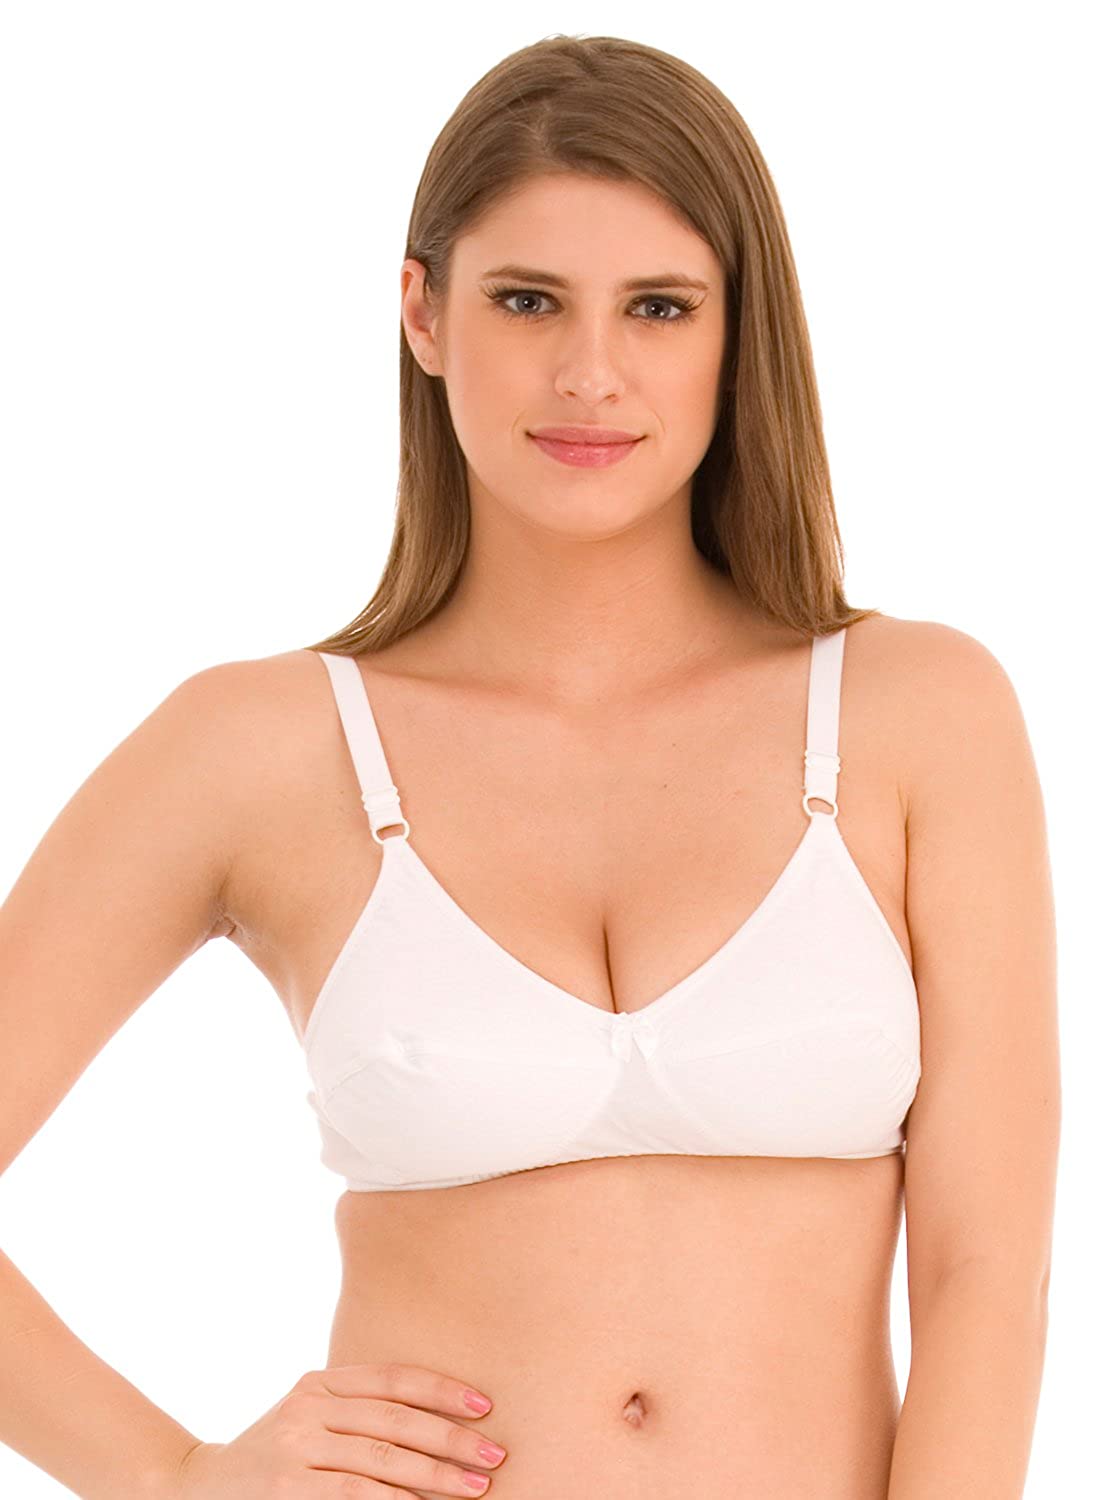 NEW BODYCARE SPORTS BRA COOL AND COMFORTABLE NICE LOOK 100% COTTON